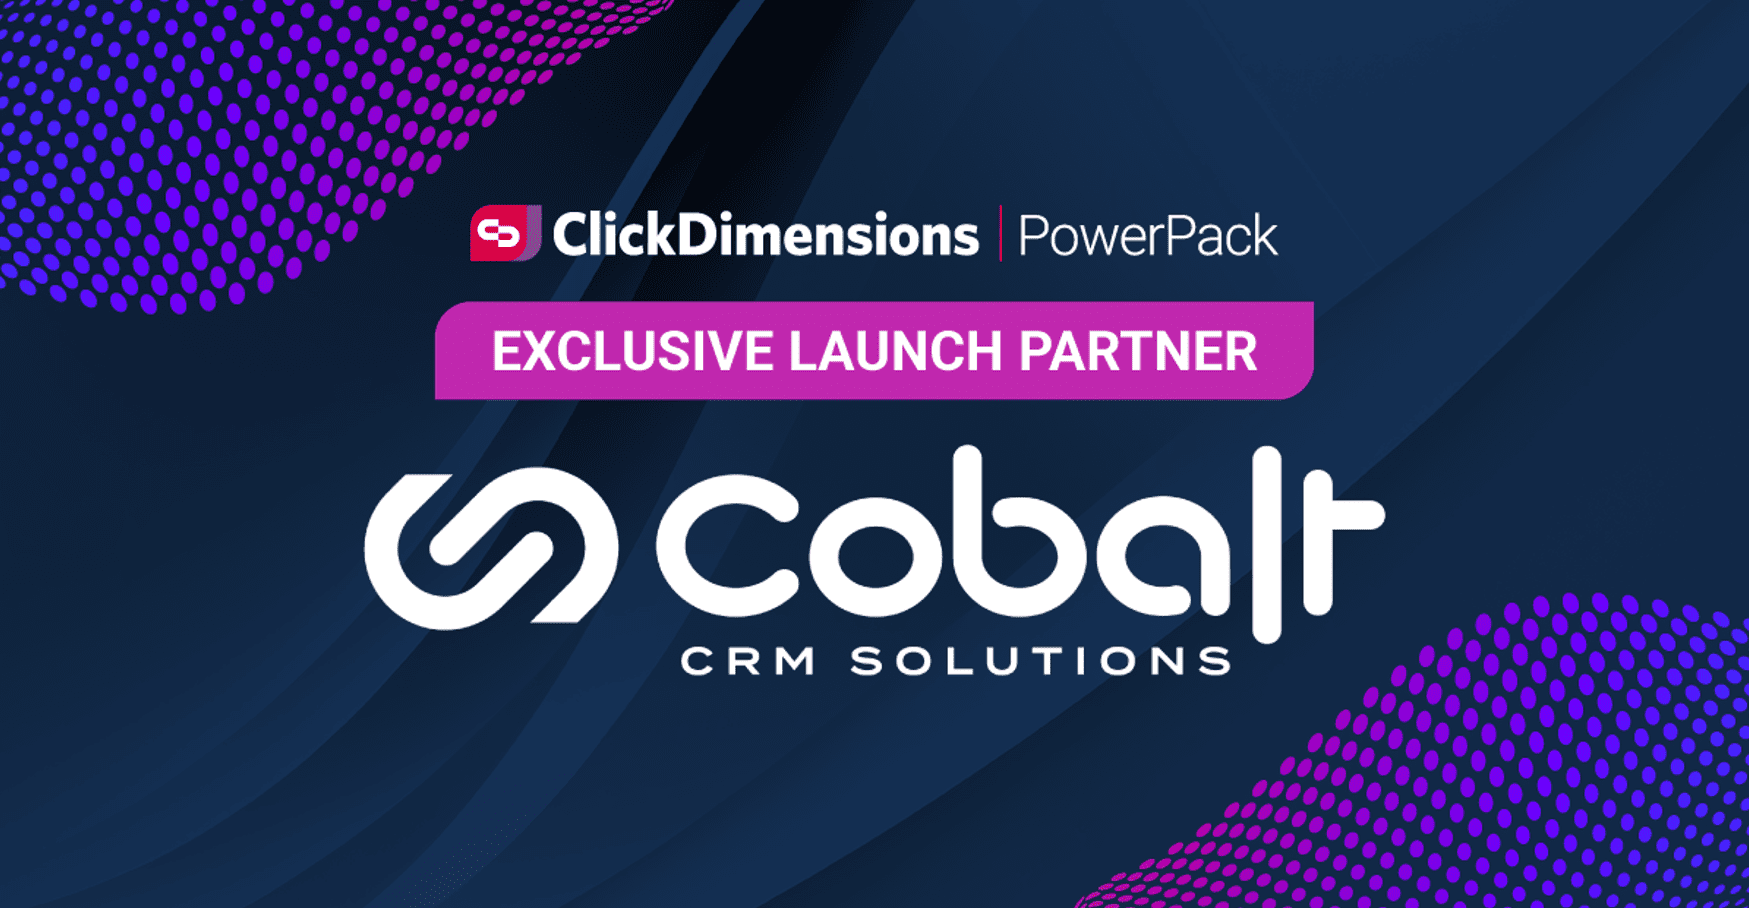 ClickDimensions names Cobalt as an exclusive partner for their new product launch, PowerPack.